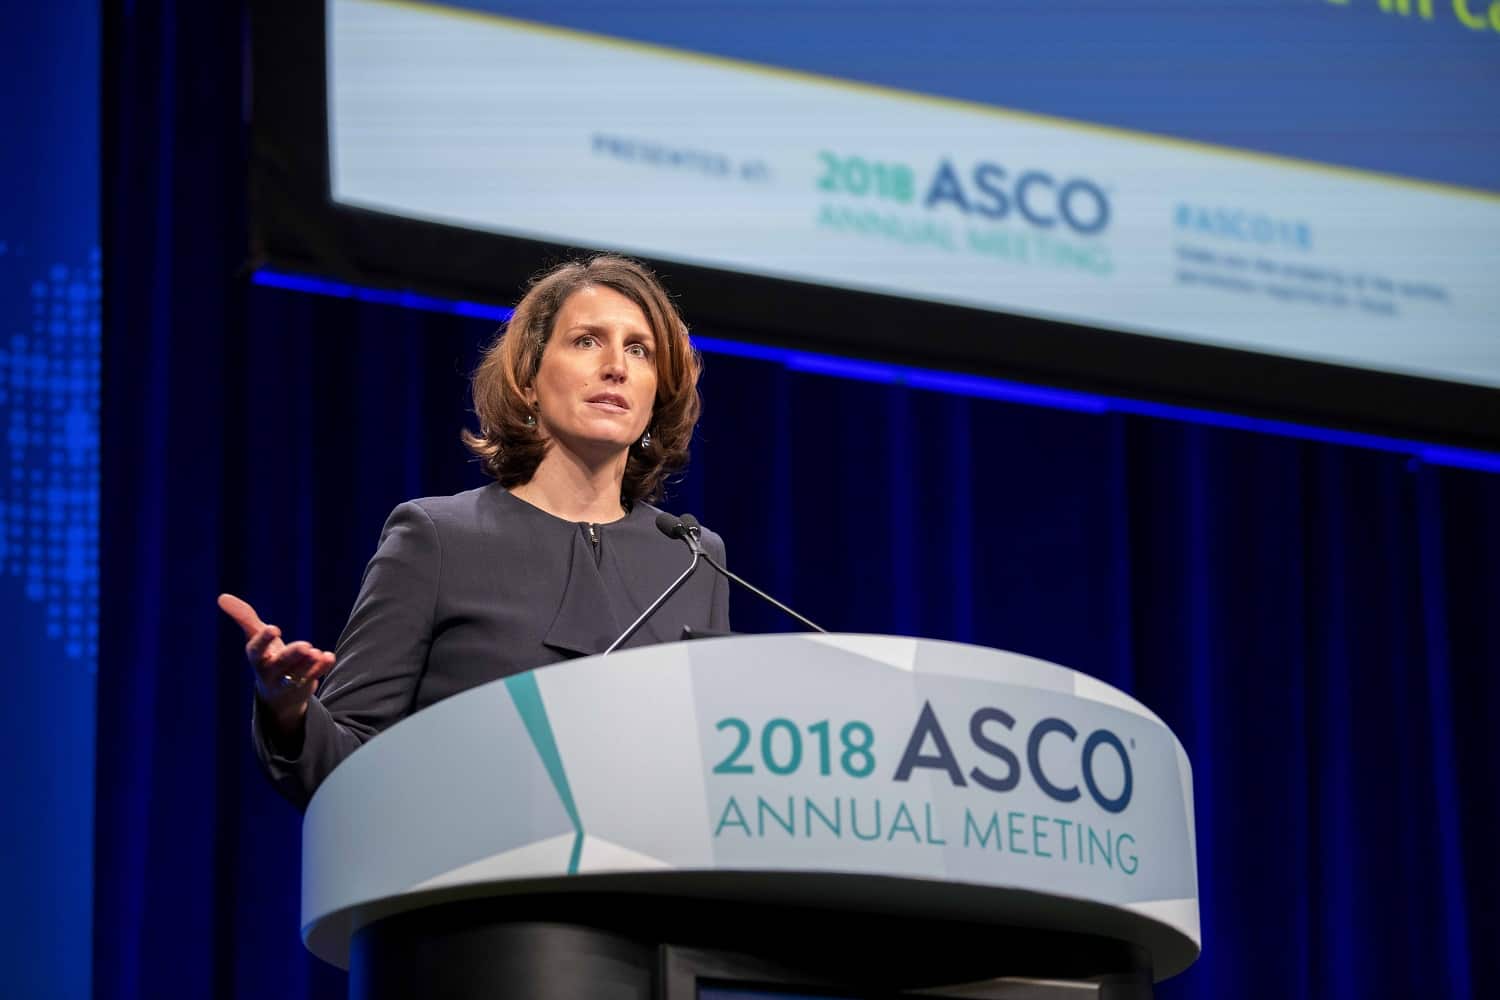 Laurence Albiges speaking at ASCO18